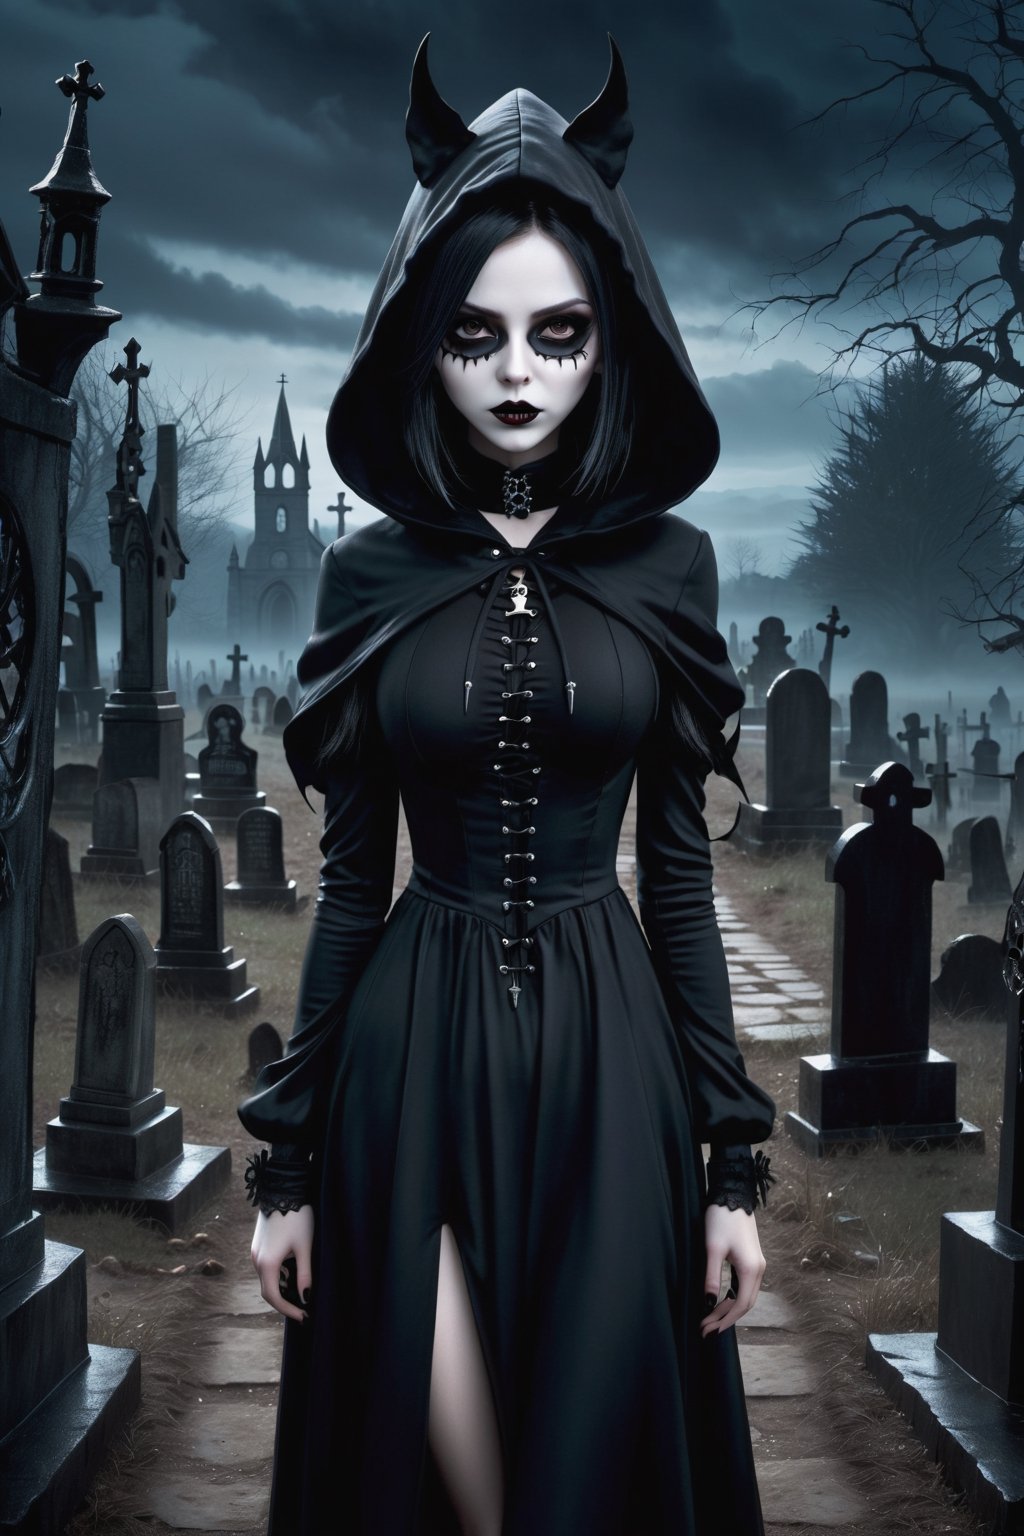 style,(masterpiece, top quality, best quality, beautiful and aesthetic,1.2,high res, ultrasharp, 8k, masterpiece, looking at viewer, centered, key visual), Girl, mask, smaller tits, black coat with a hood, long black dress, sexy, graveyard in background, dark mood, scary, seductive expression,goth person